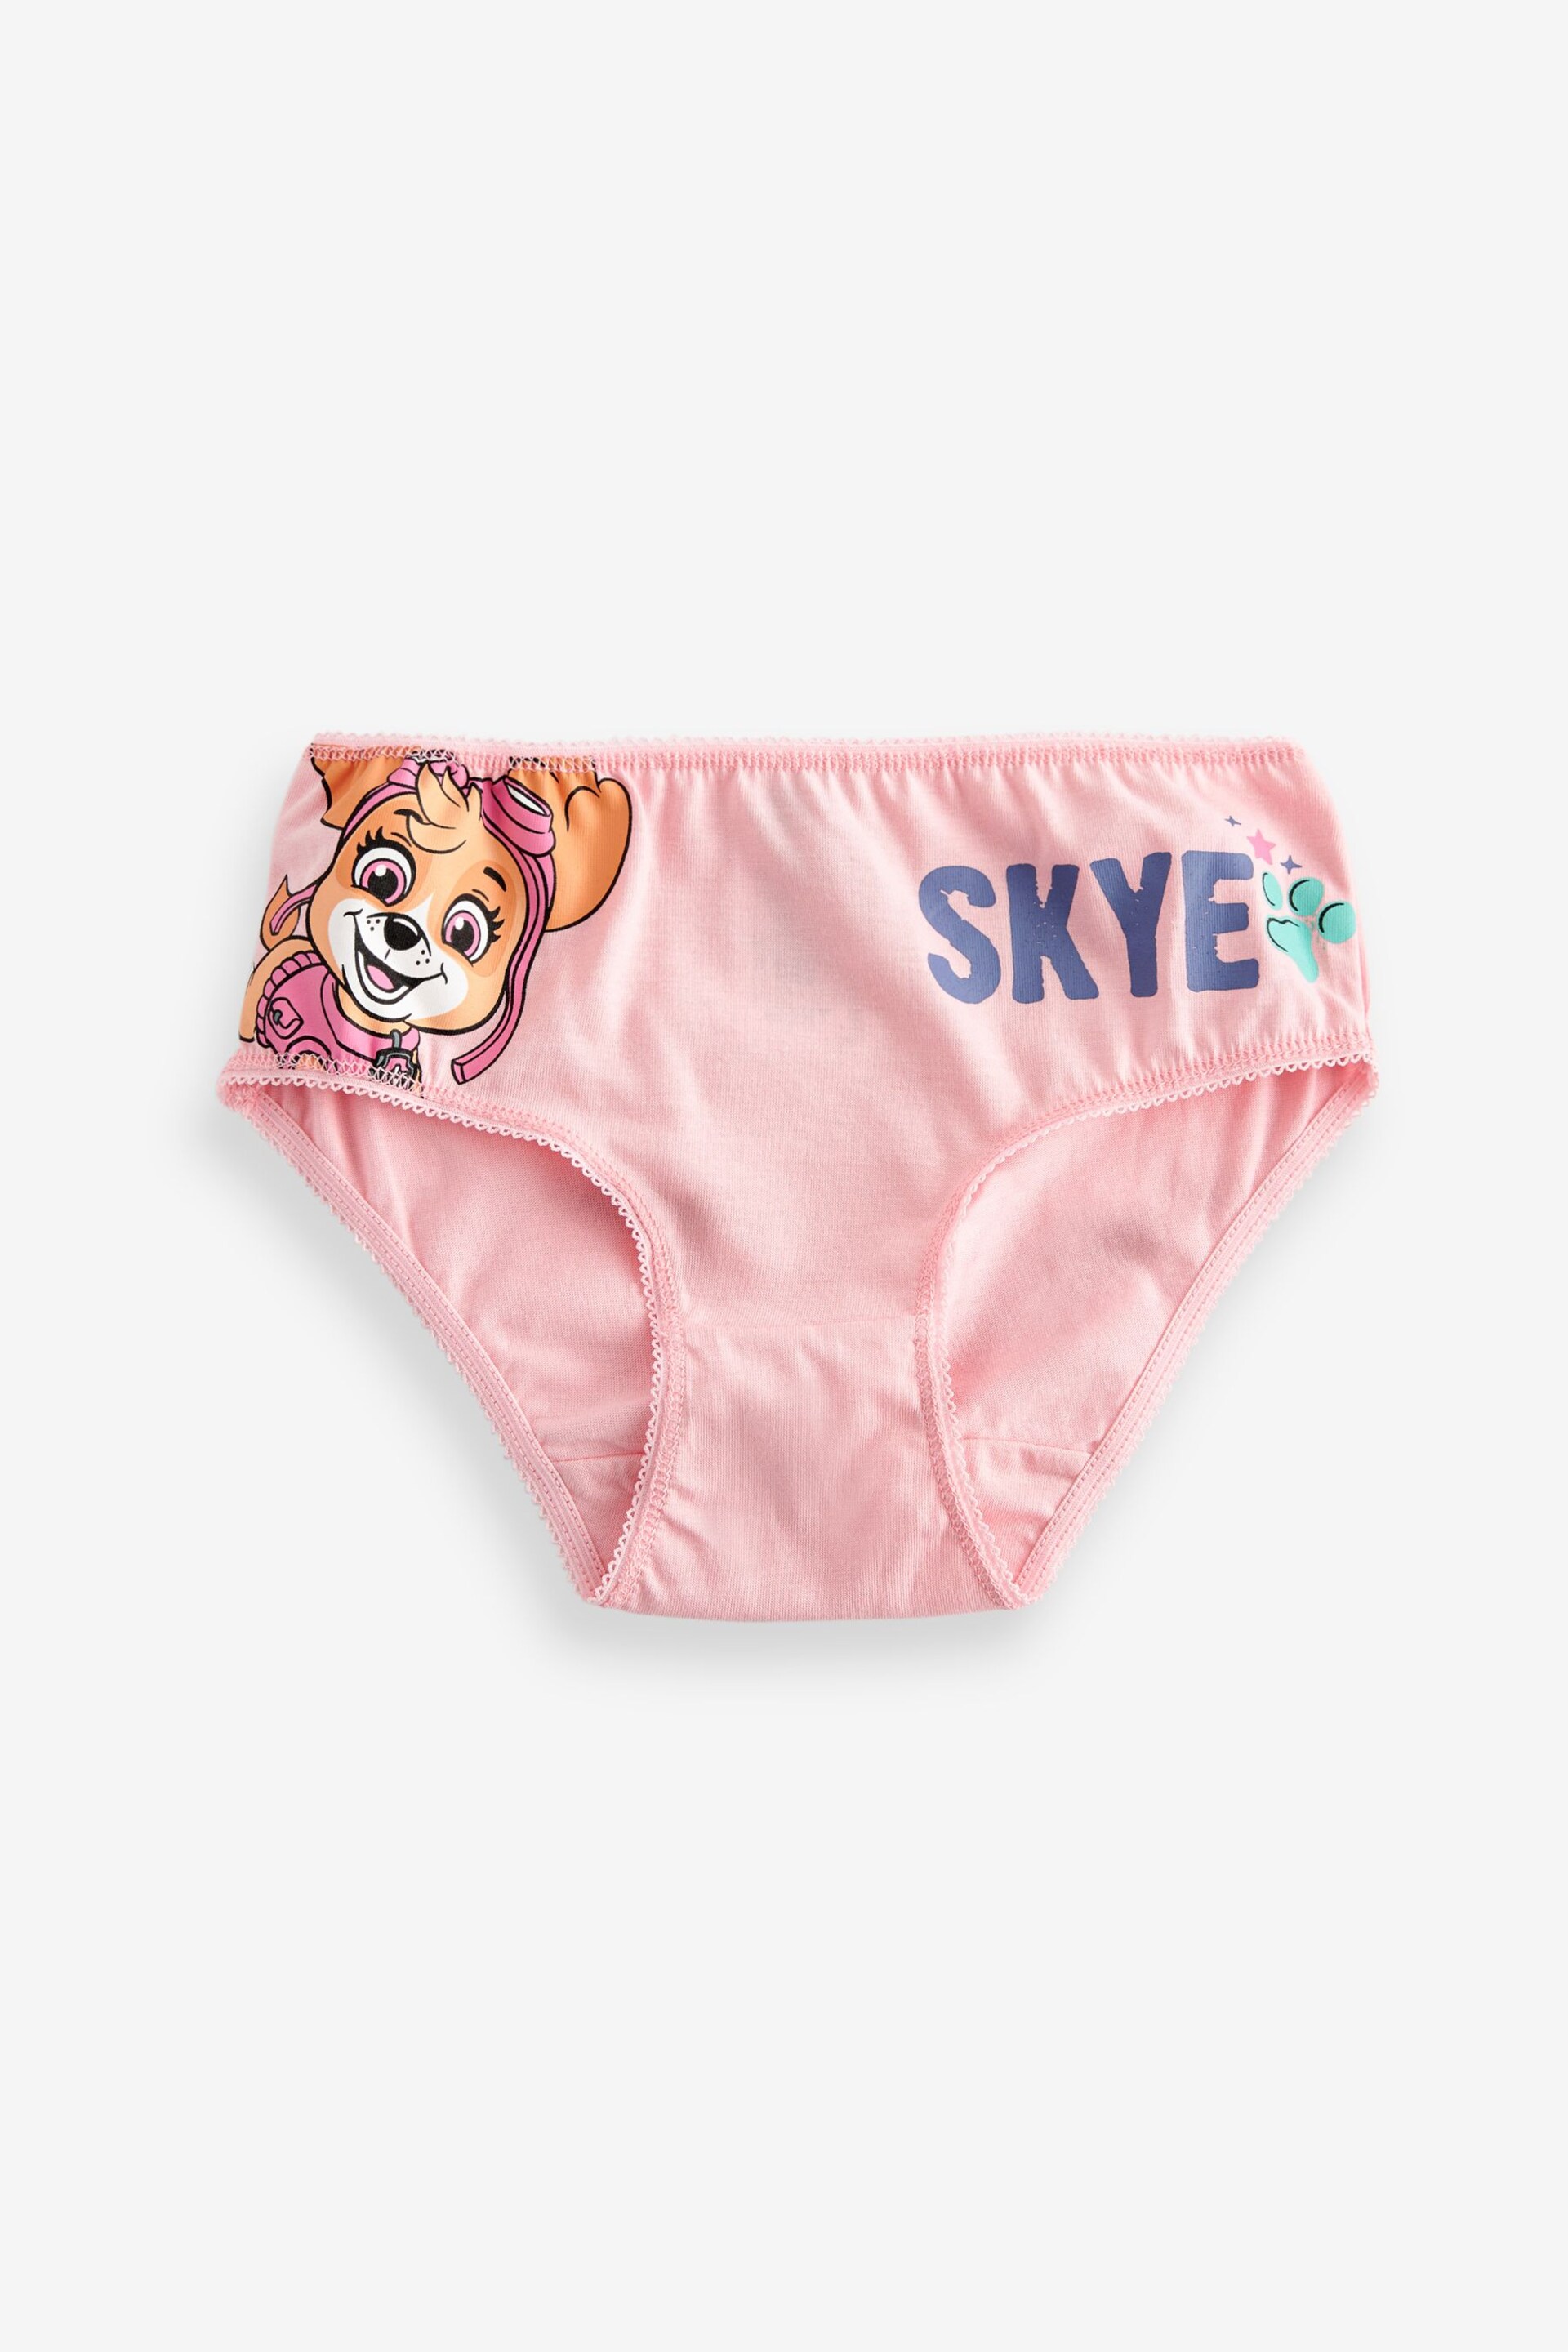 Blue/Pink Paw Patrol Briefs 5 Pack (2-8yrs) - Image 6 of 8